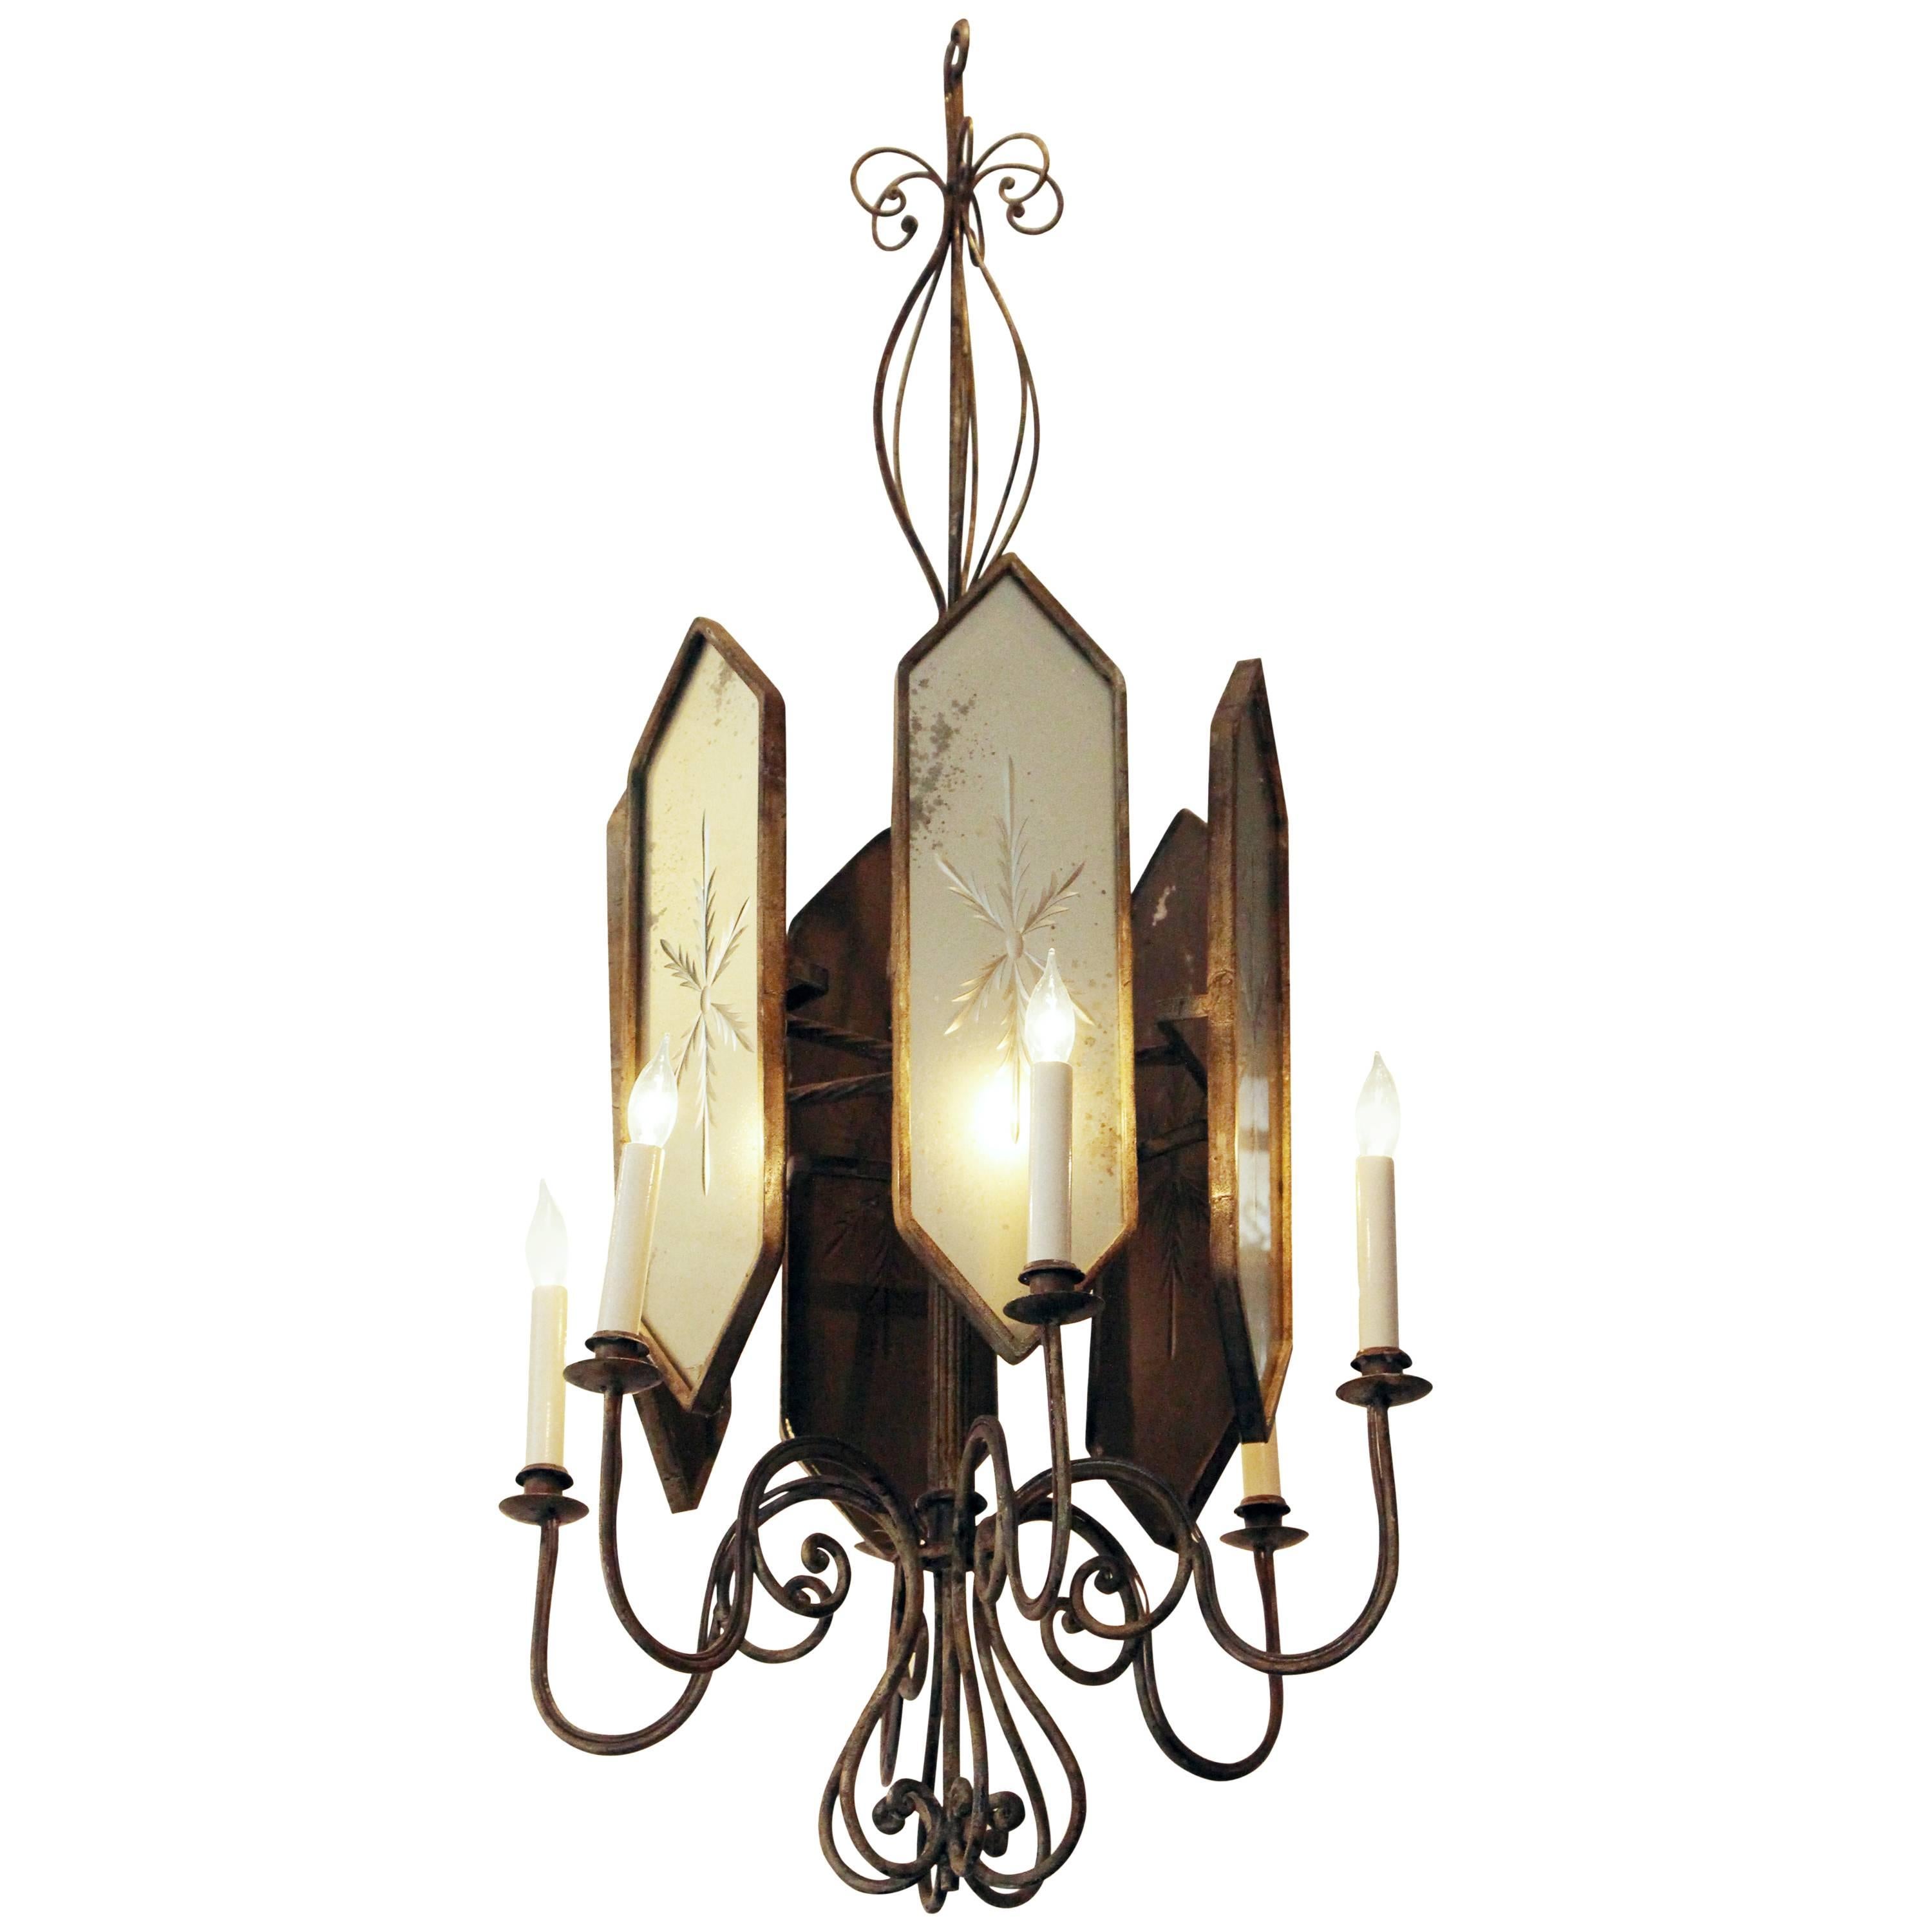 French Art Deco Venetian Style Six-Arm Chandelier with Etched Mirrored Glass